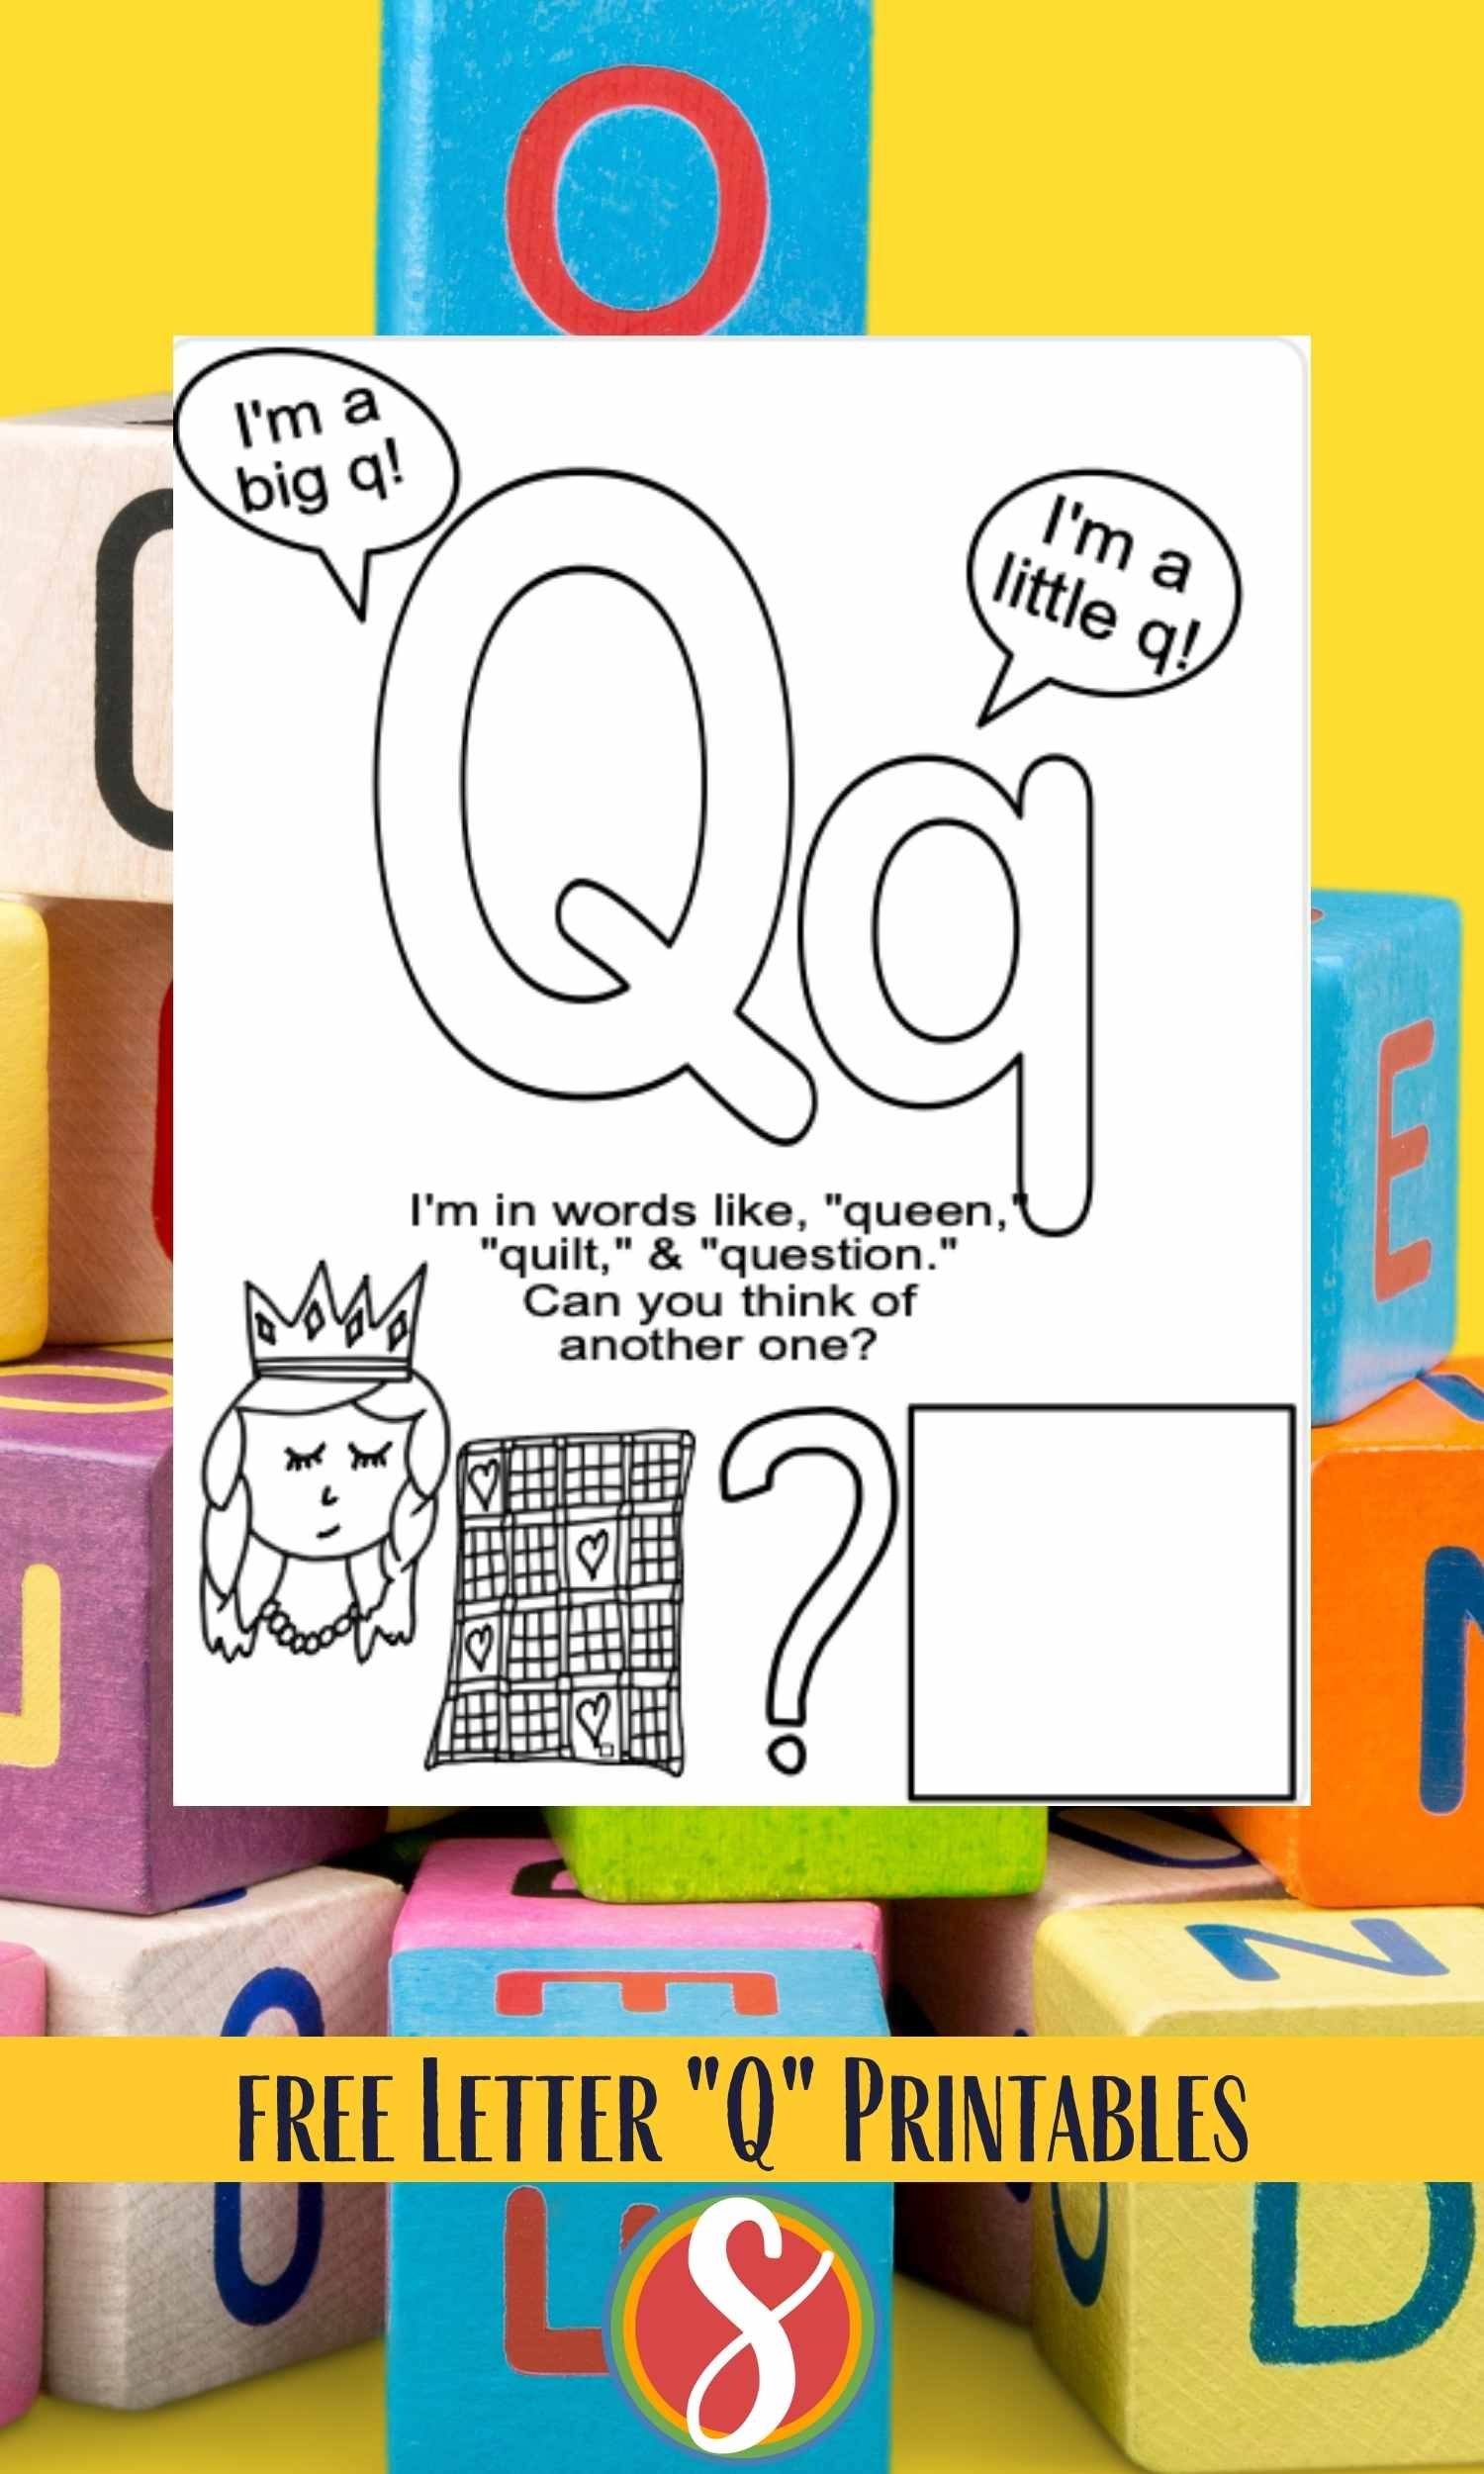 Outline of letters "Qq" with queen, quilt, and question mark to color